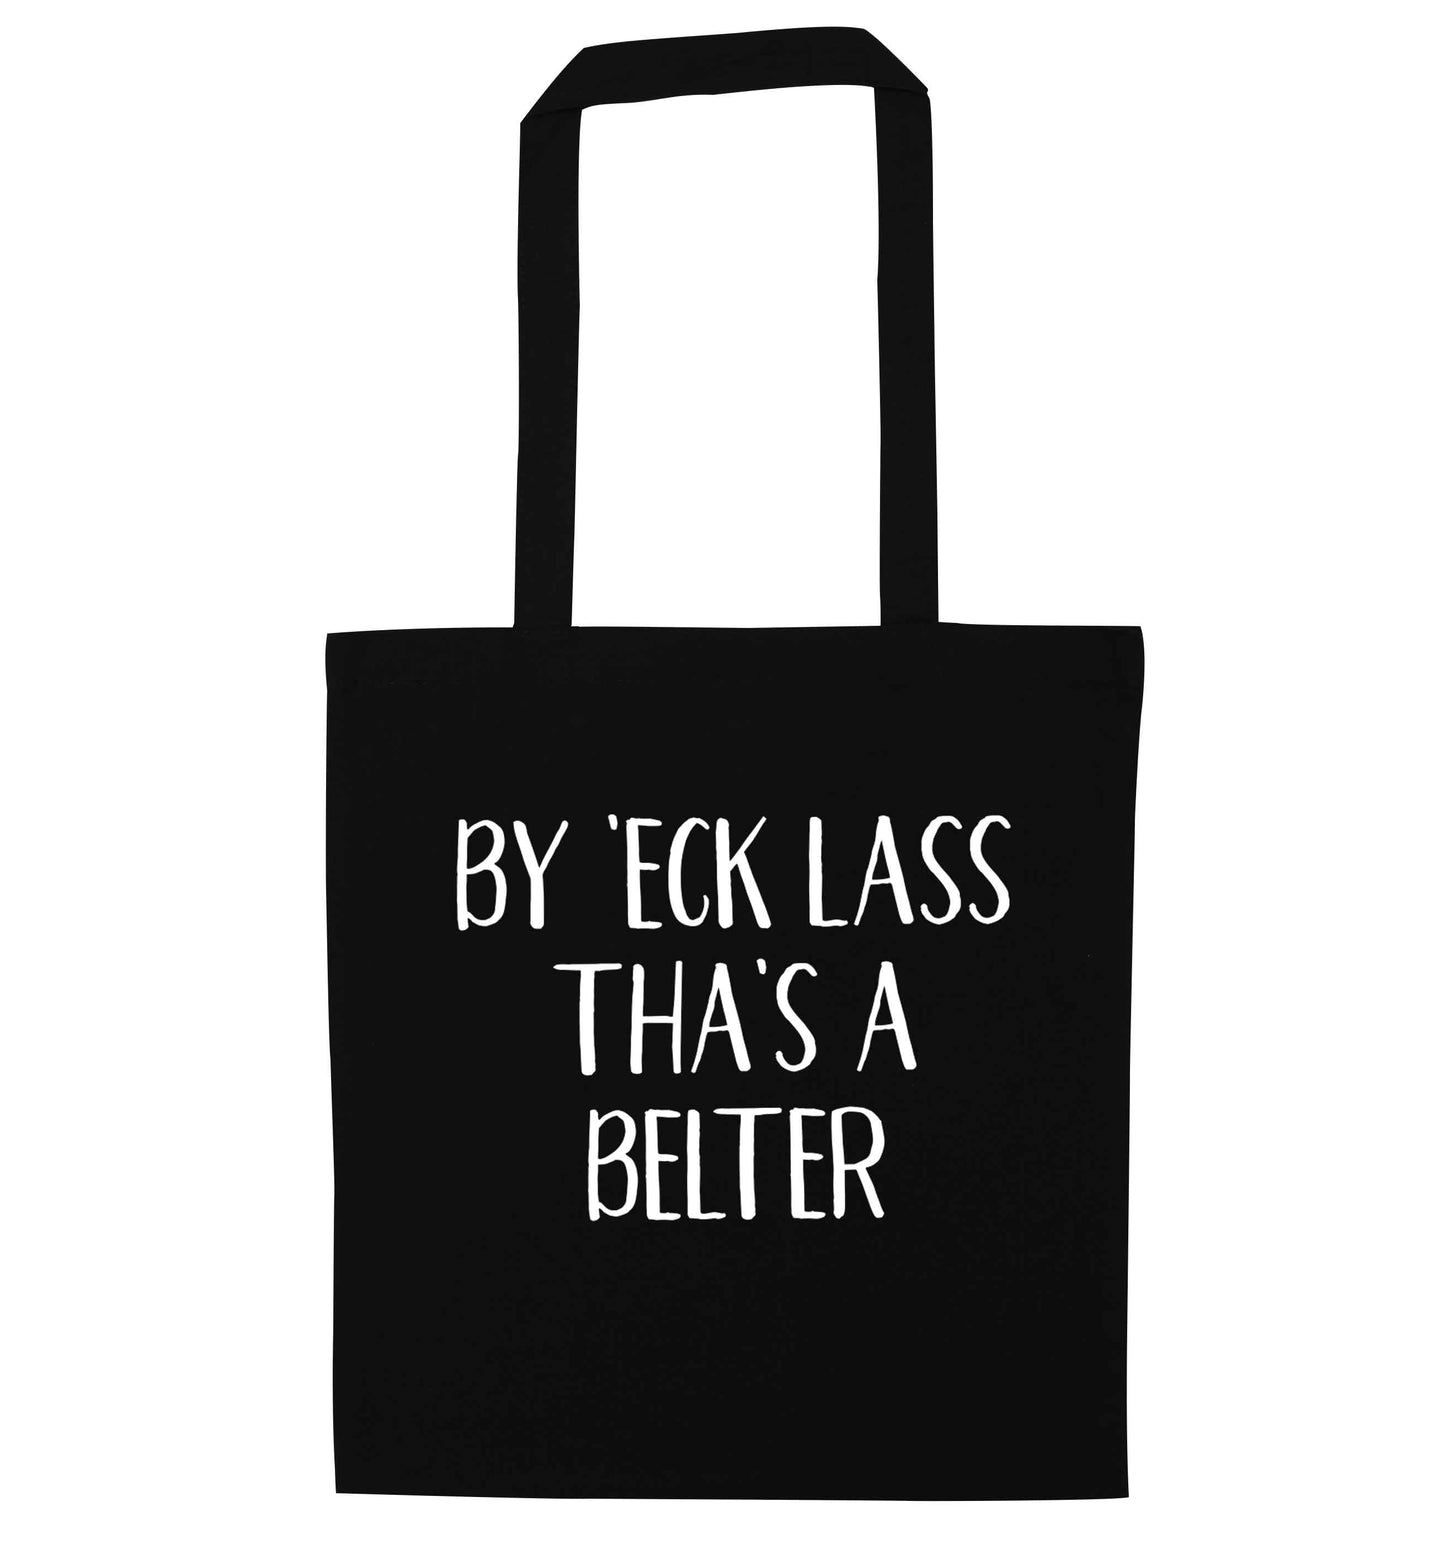 Be 'eck lass tha's a belter black tote bag